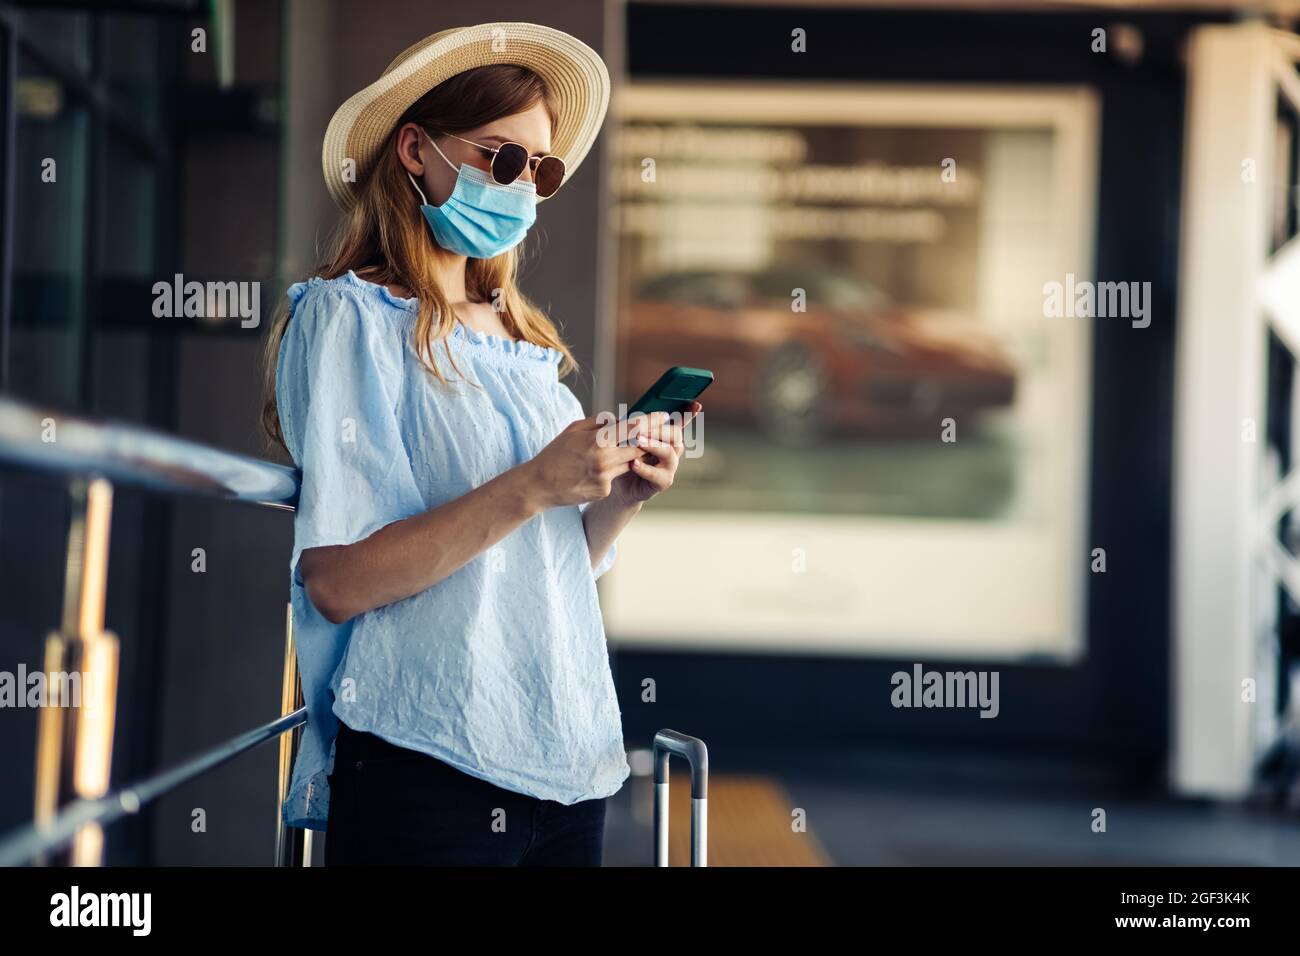 Young traveler in a medical protective mask on her face, a woman walks with suitcases and uses a mobile phone, over the airport building, Concept of t Stock Photo